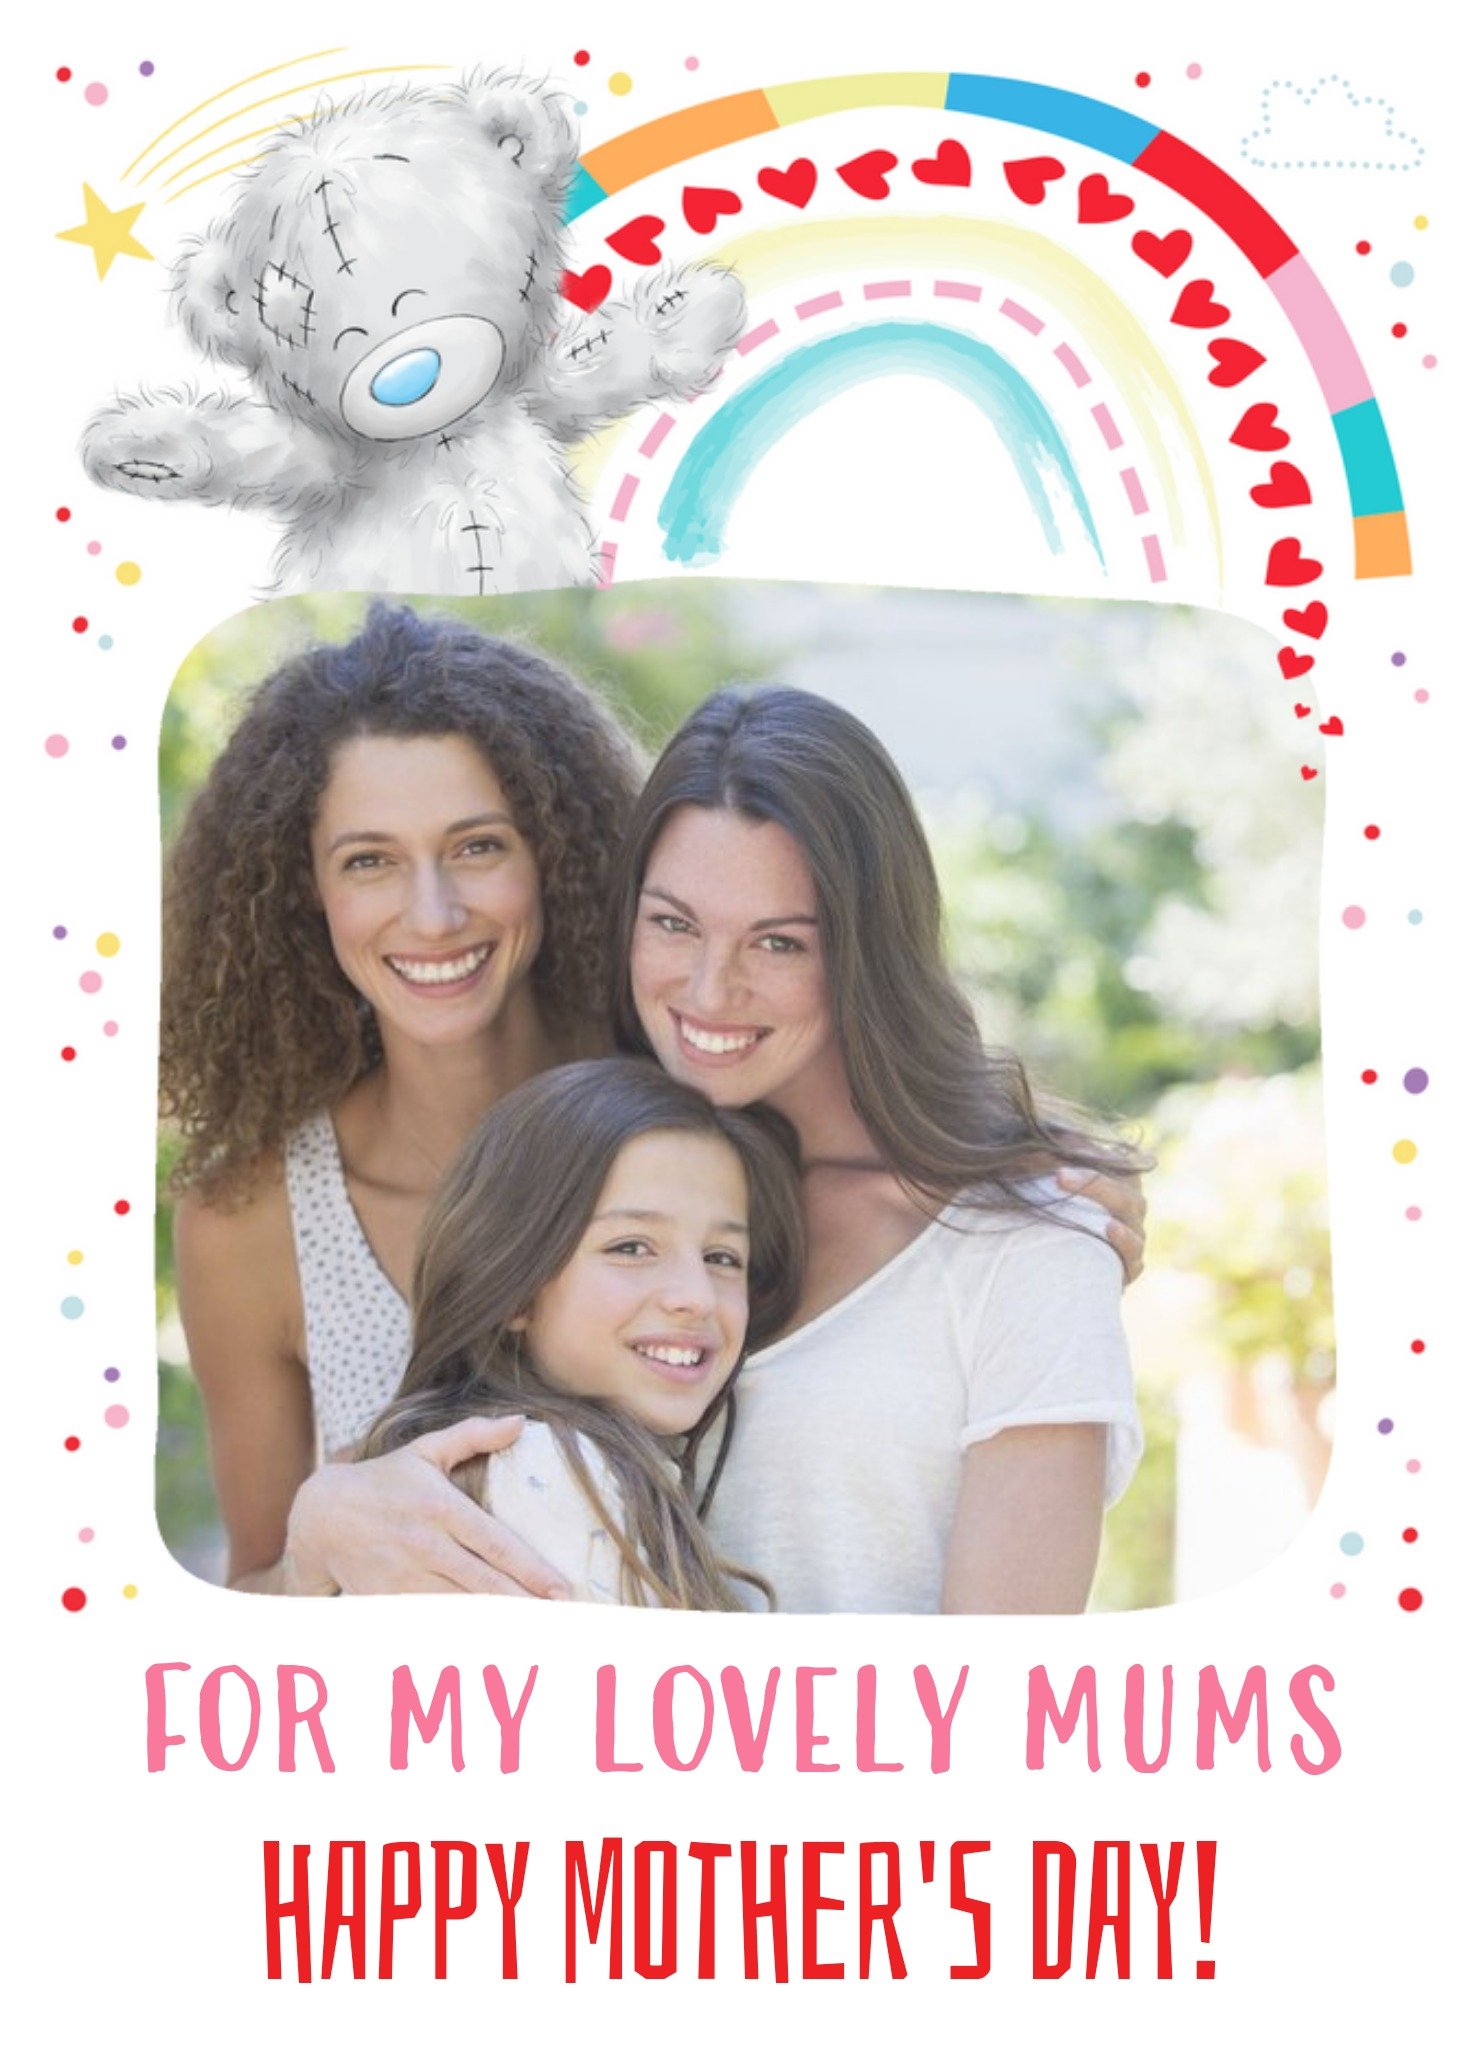 Me To You For My Lovely Mums Lesbian Couple LGBTQ+ Happy Mothers Day Card, Large